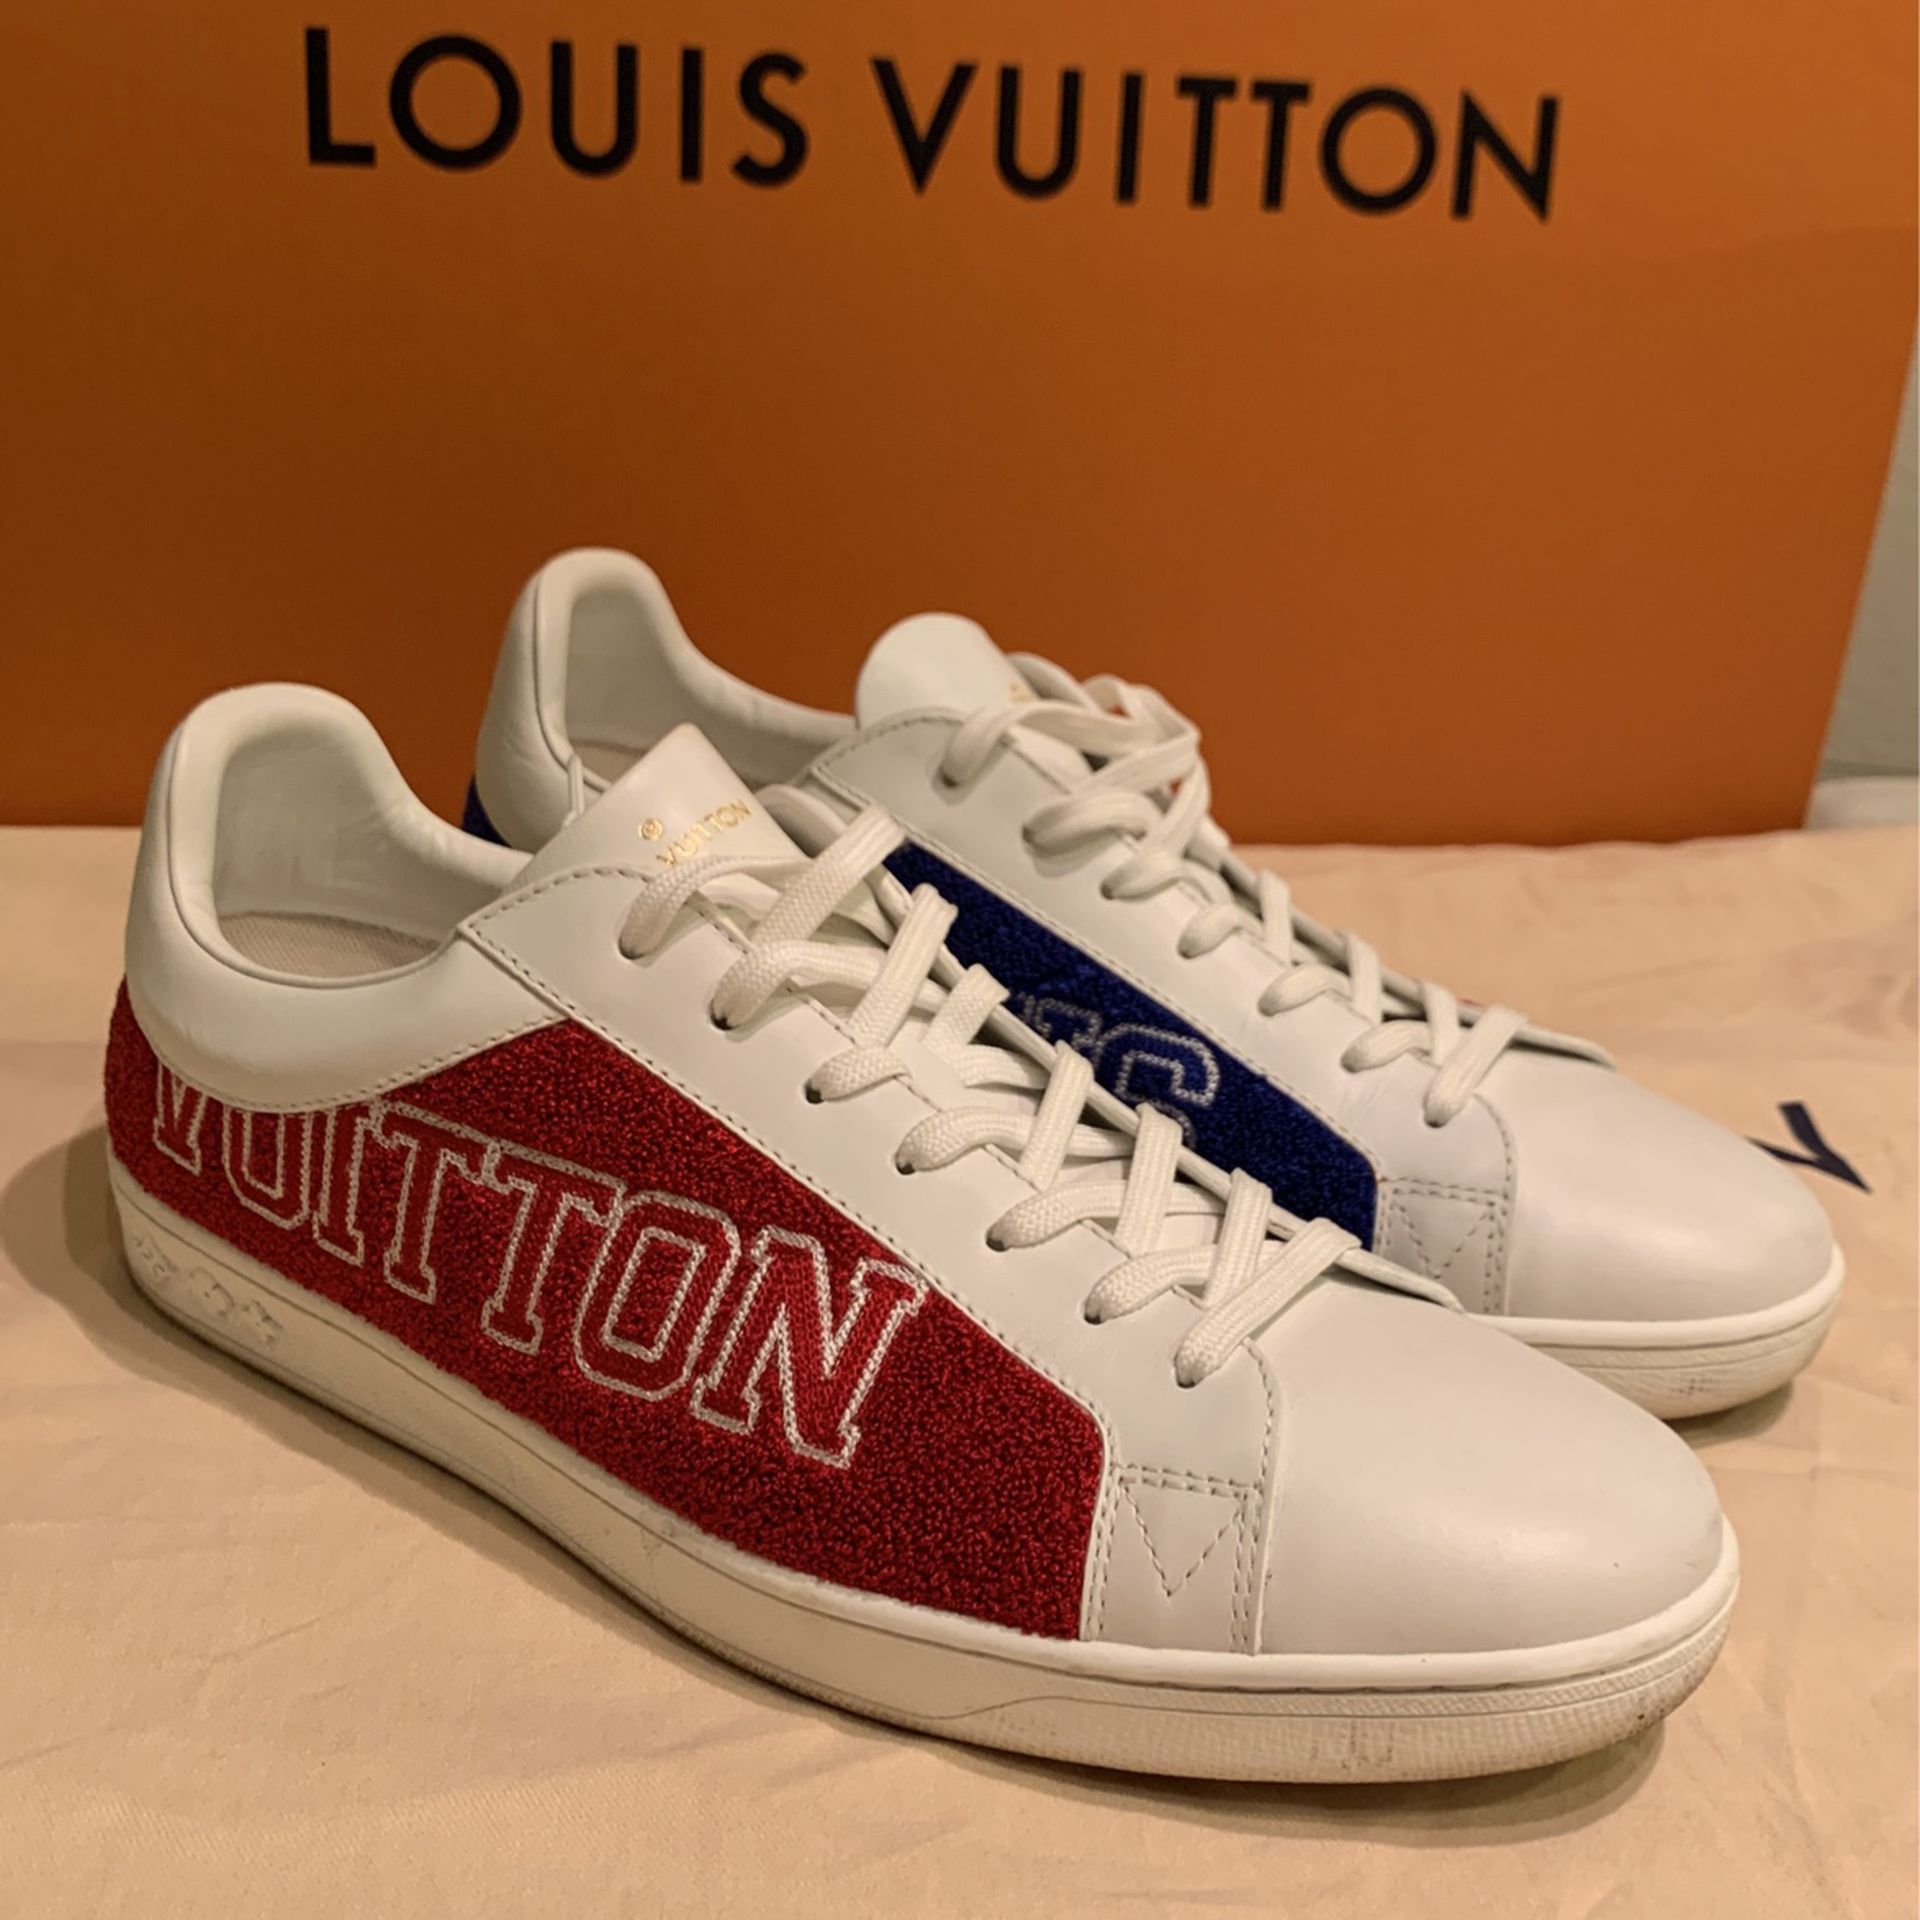 red and blue louis vuittons